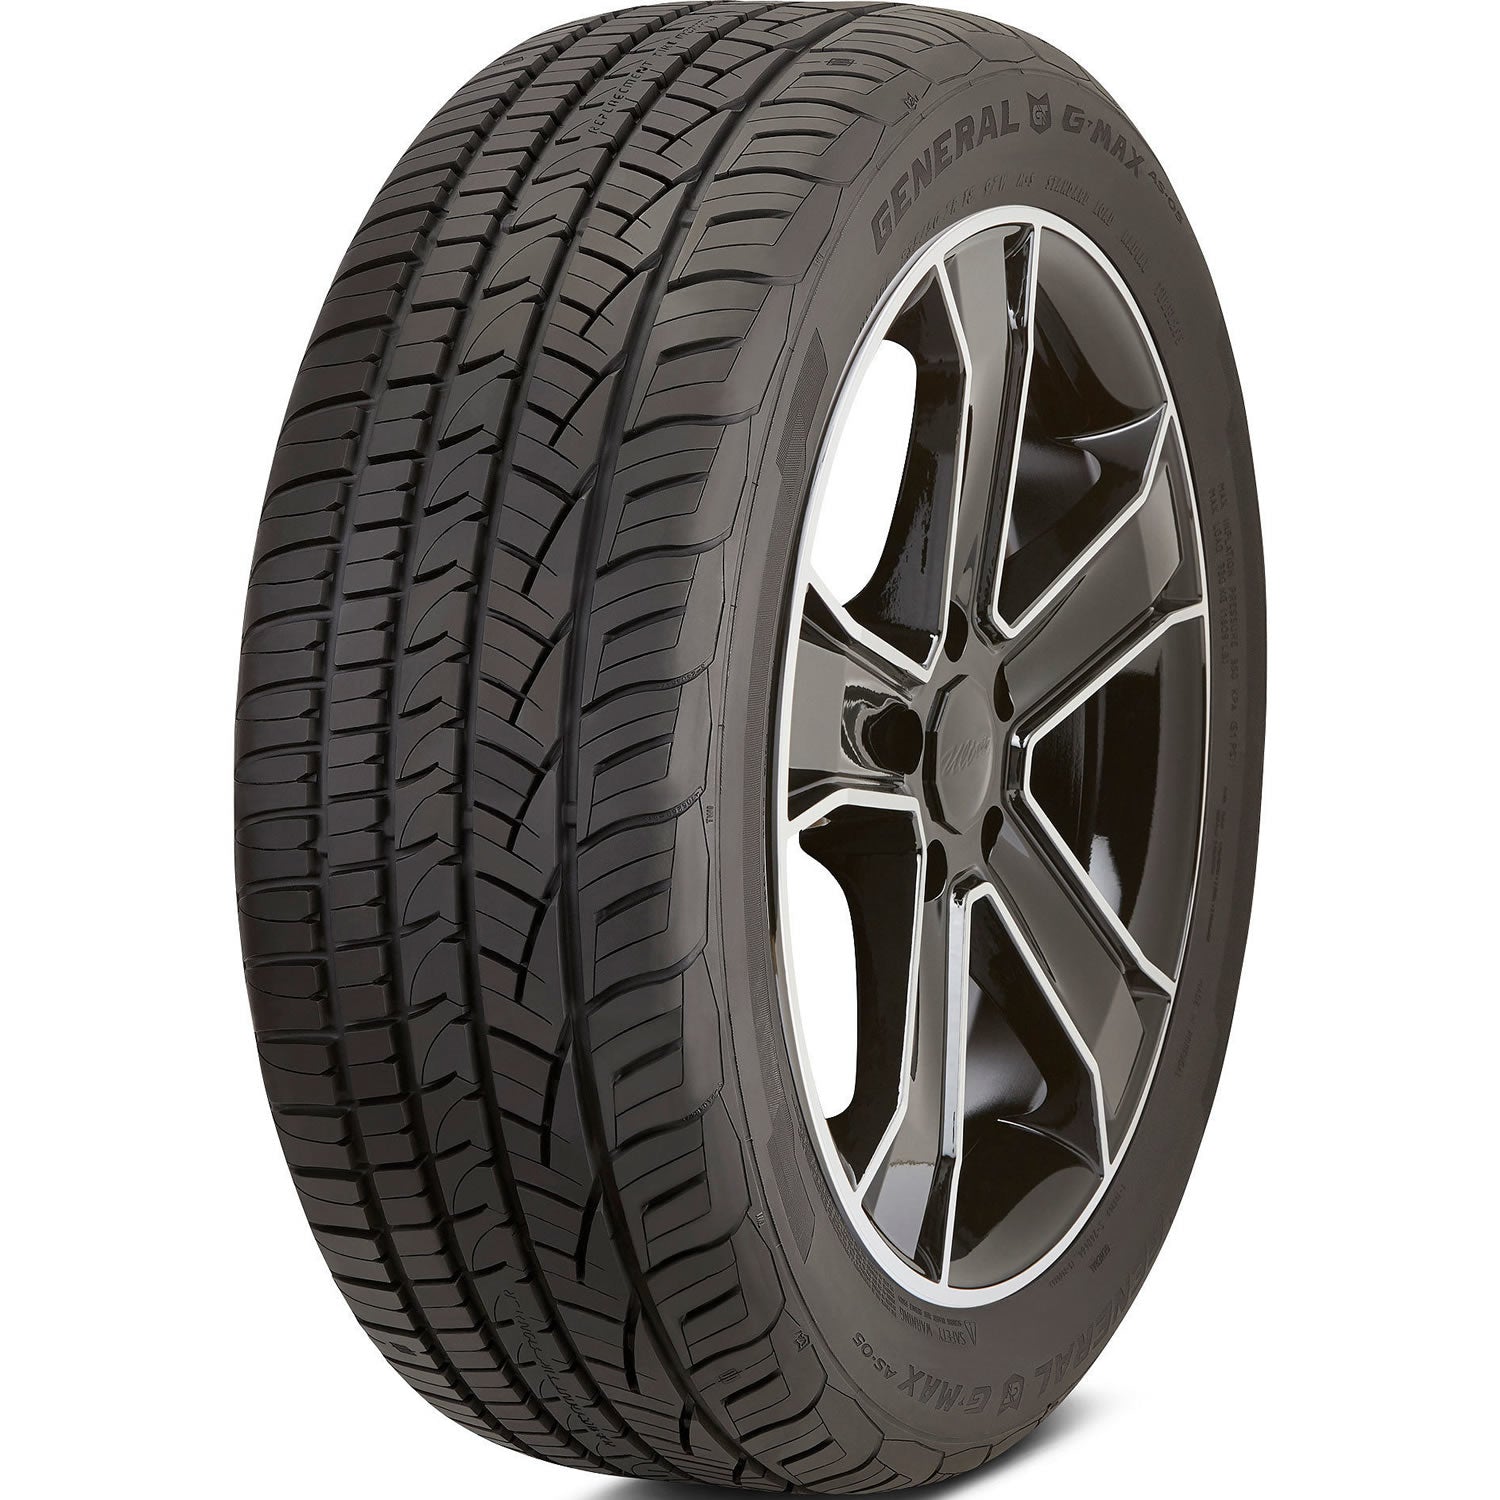 GENERAL G-MAX AS-05 225/45ZR18 (26X8.9R 18) Tires